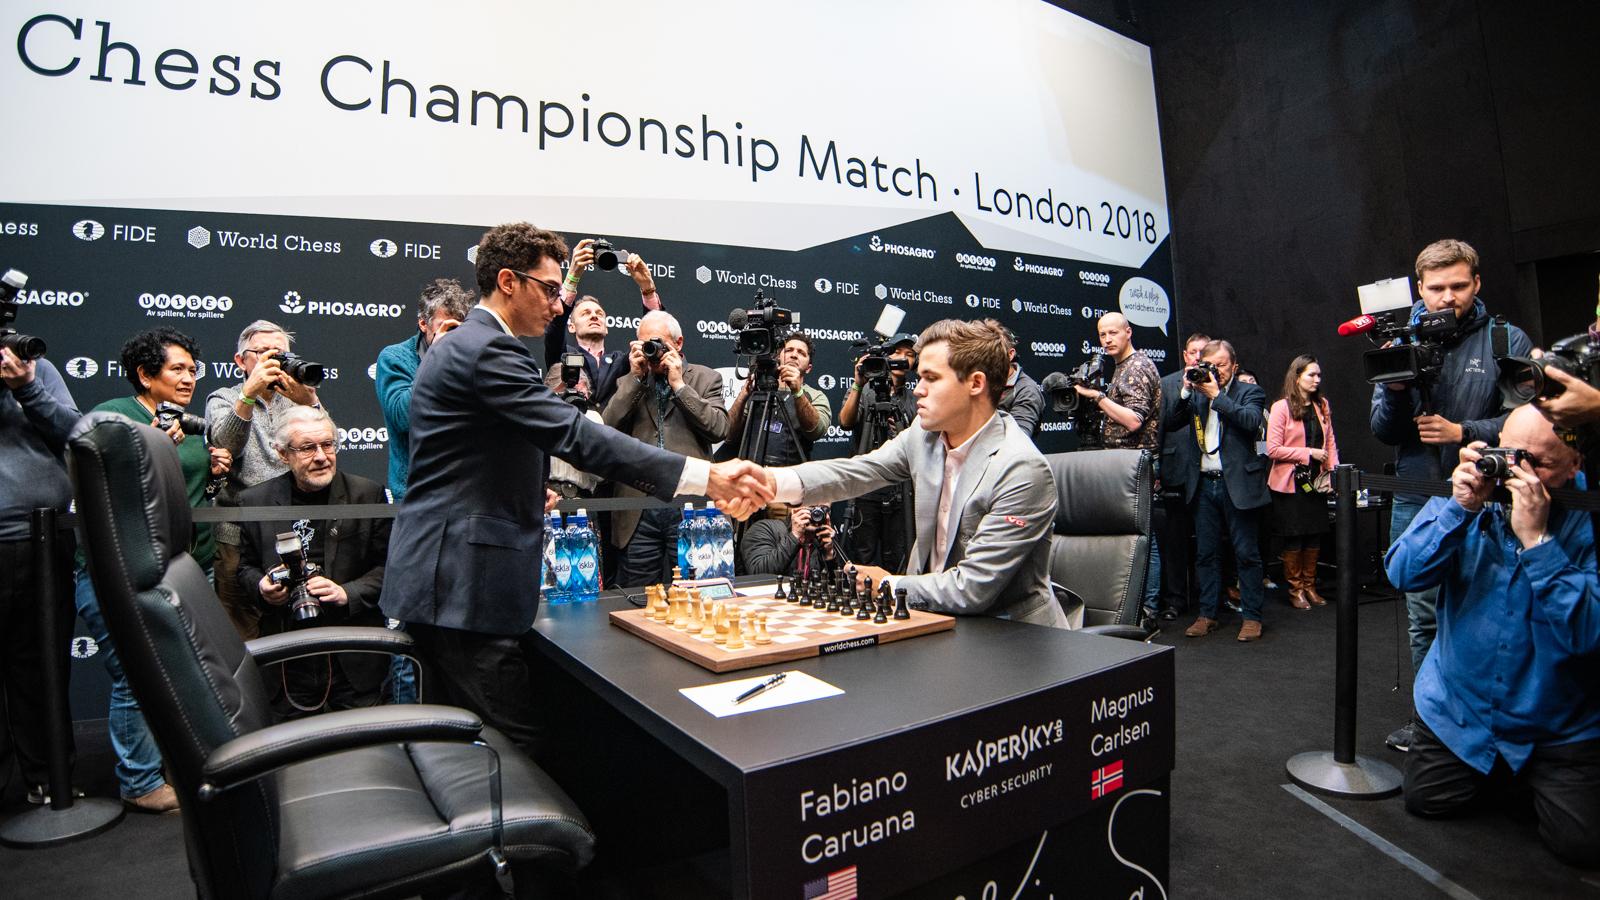 Magnus Carlsen turns tables on Fabiano Caruana in Game 3 draw – as